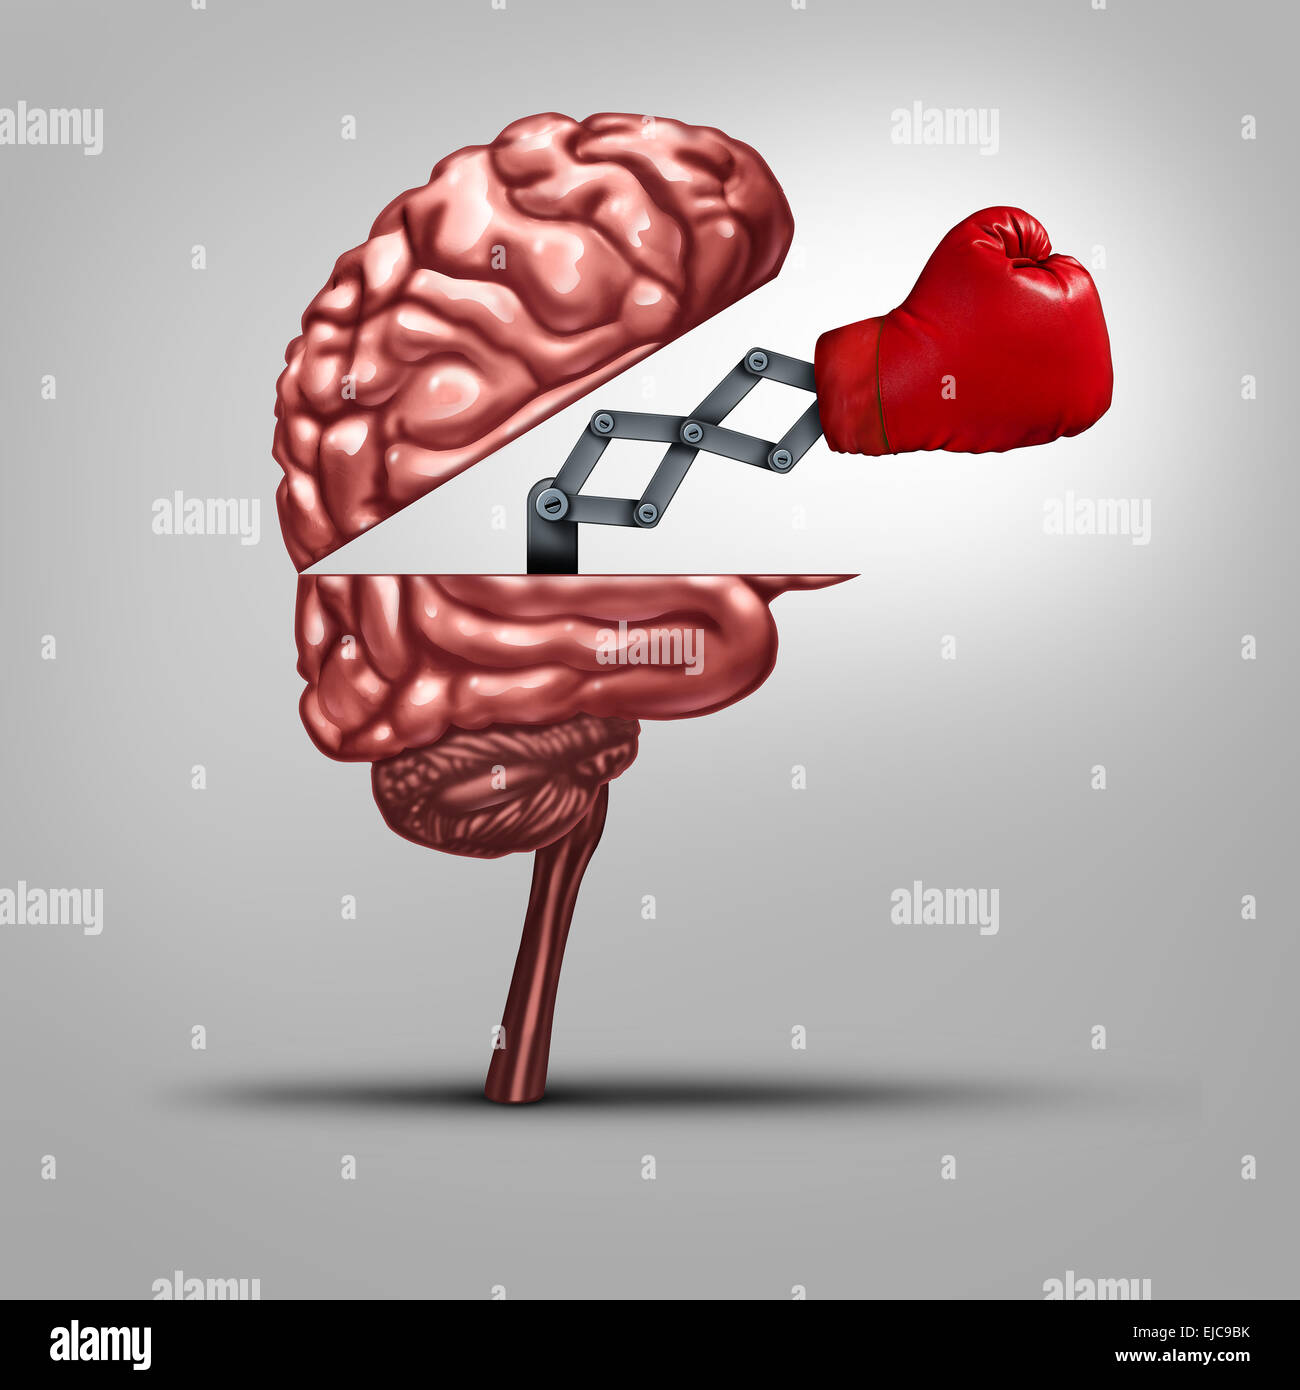 Strong memory and brain strength symbol as a human thinking organ opened to reveal a boxing glove as a concept for fighting alzhiemers disease and other dimentia illnesses or education tools to help competitiveness. Stock Photo